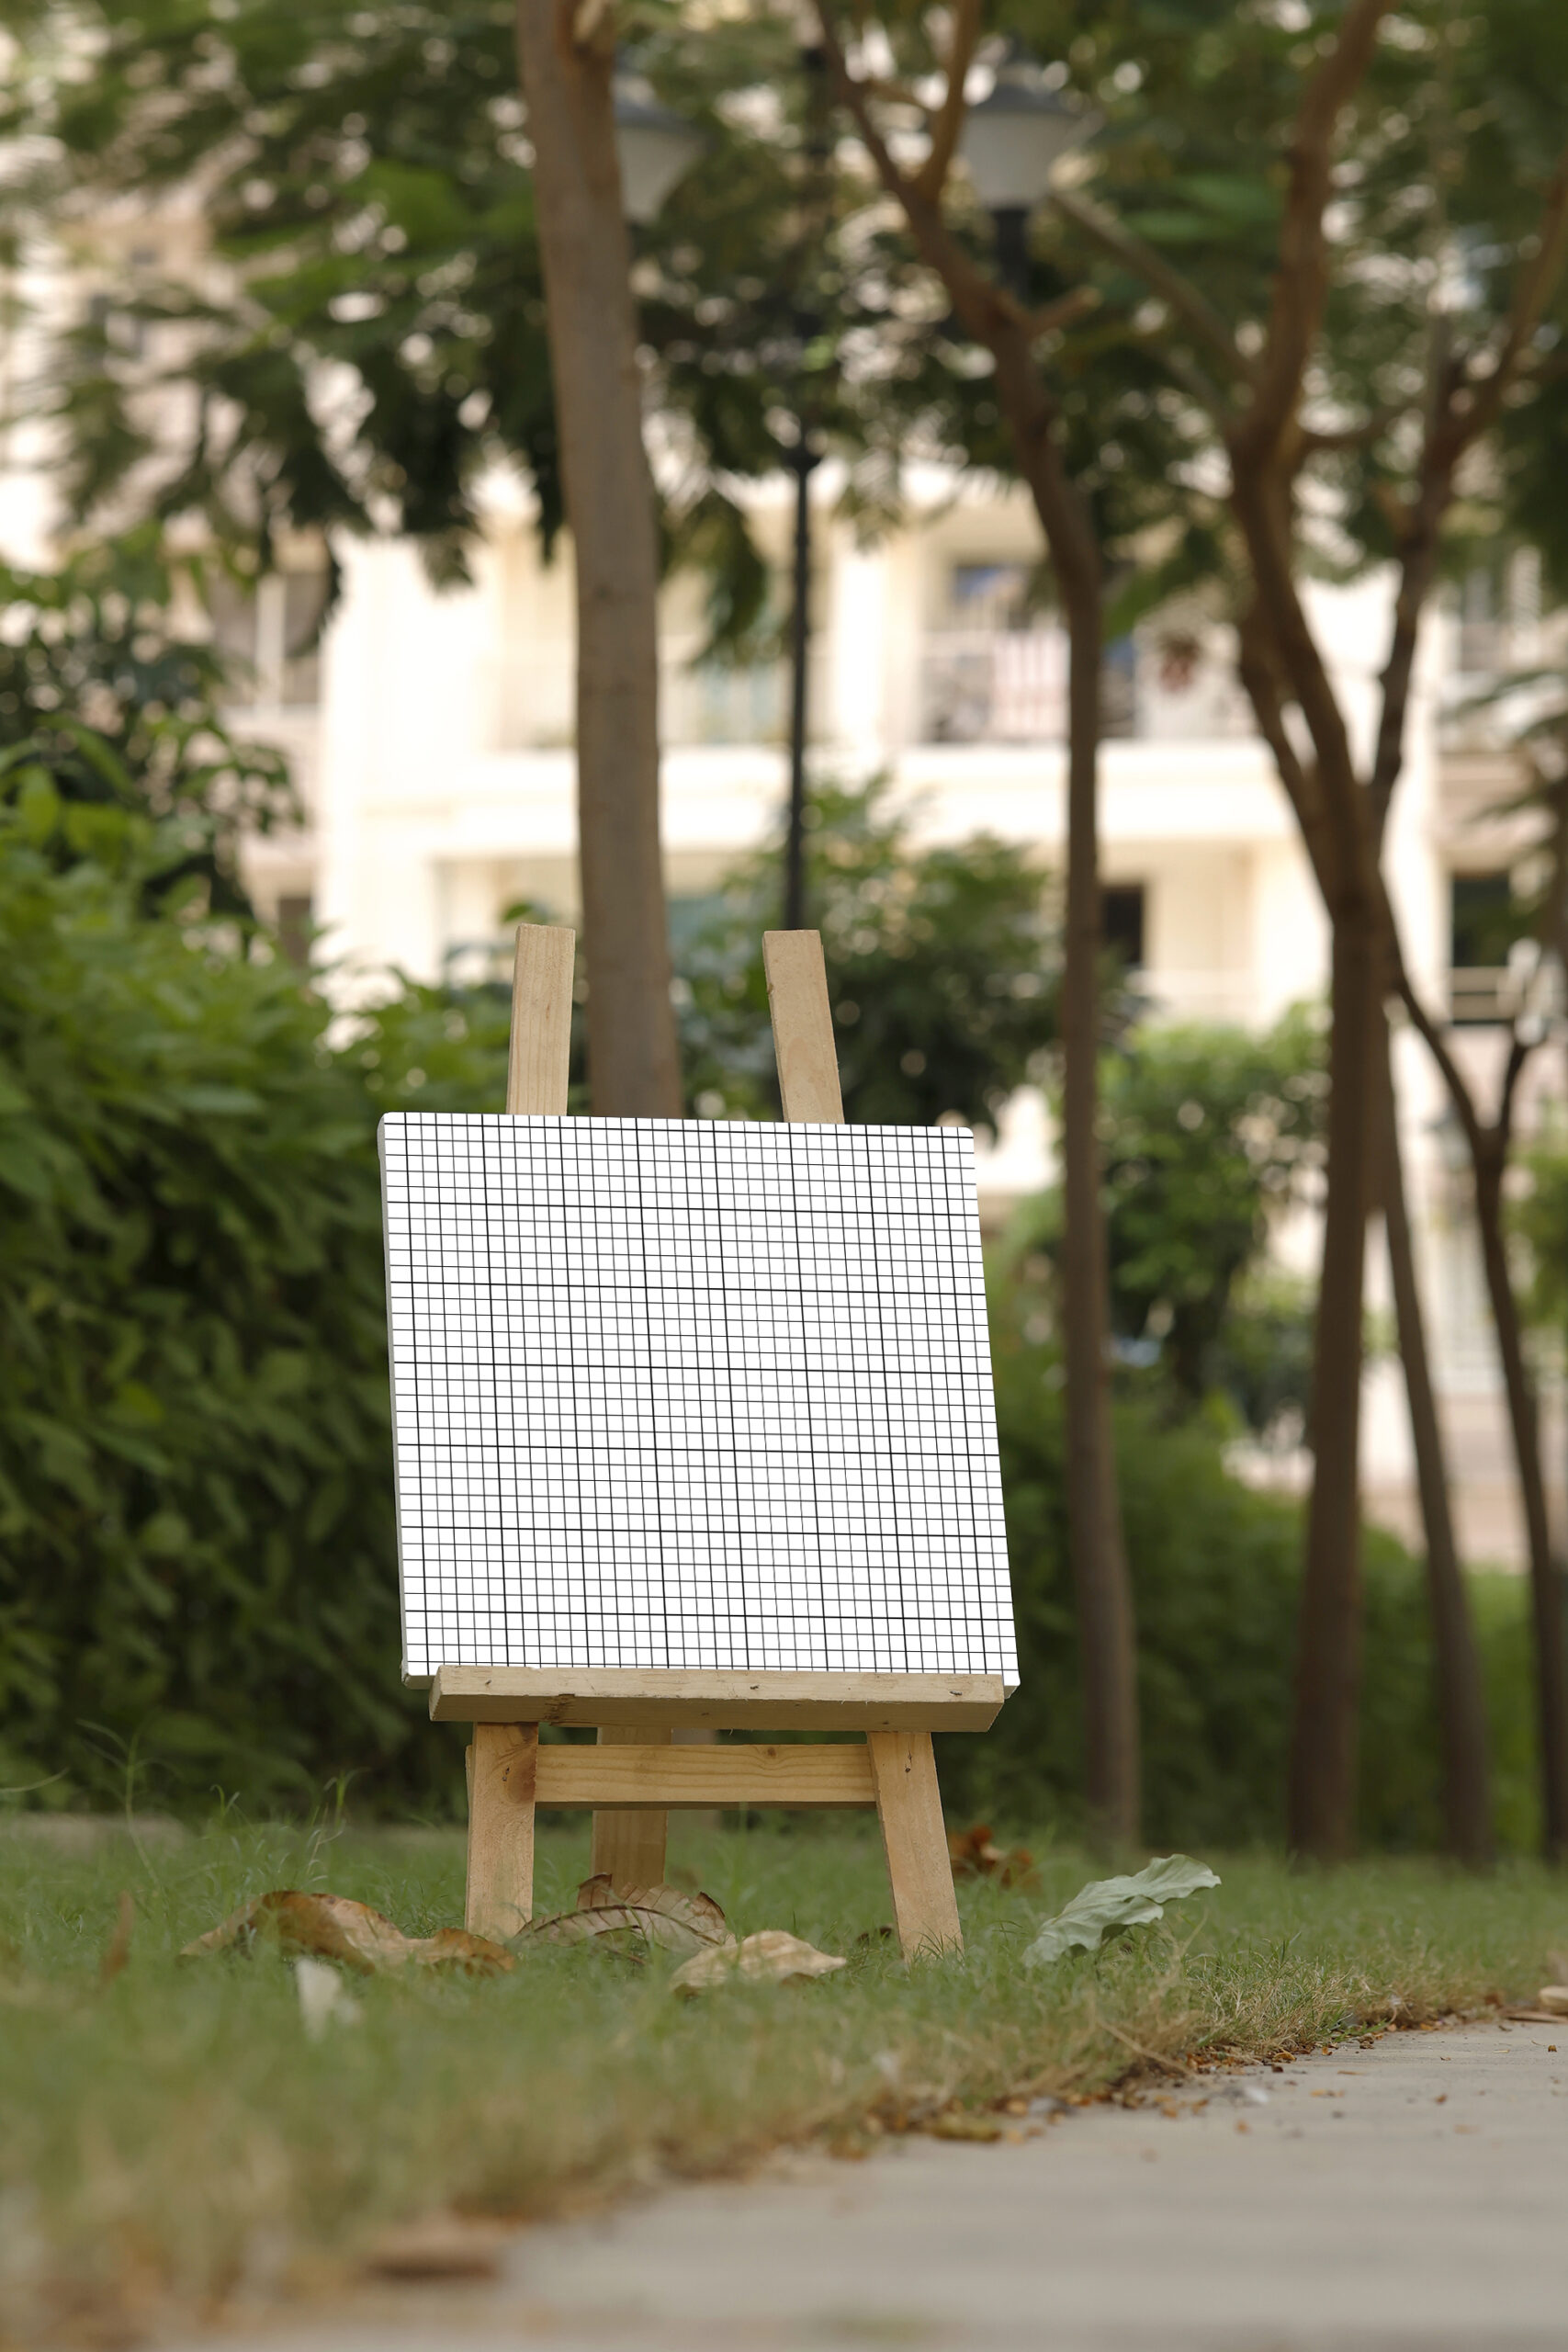 Free Download Outdoor square canvas mockup on easel